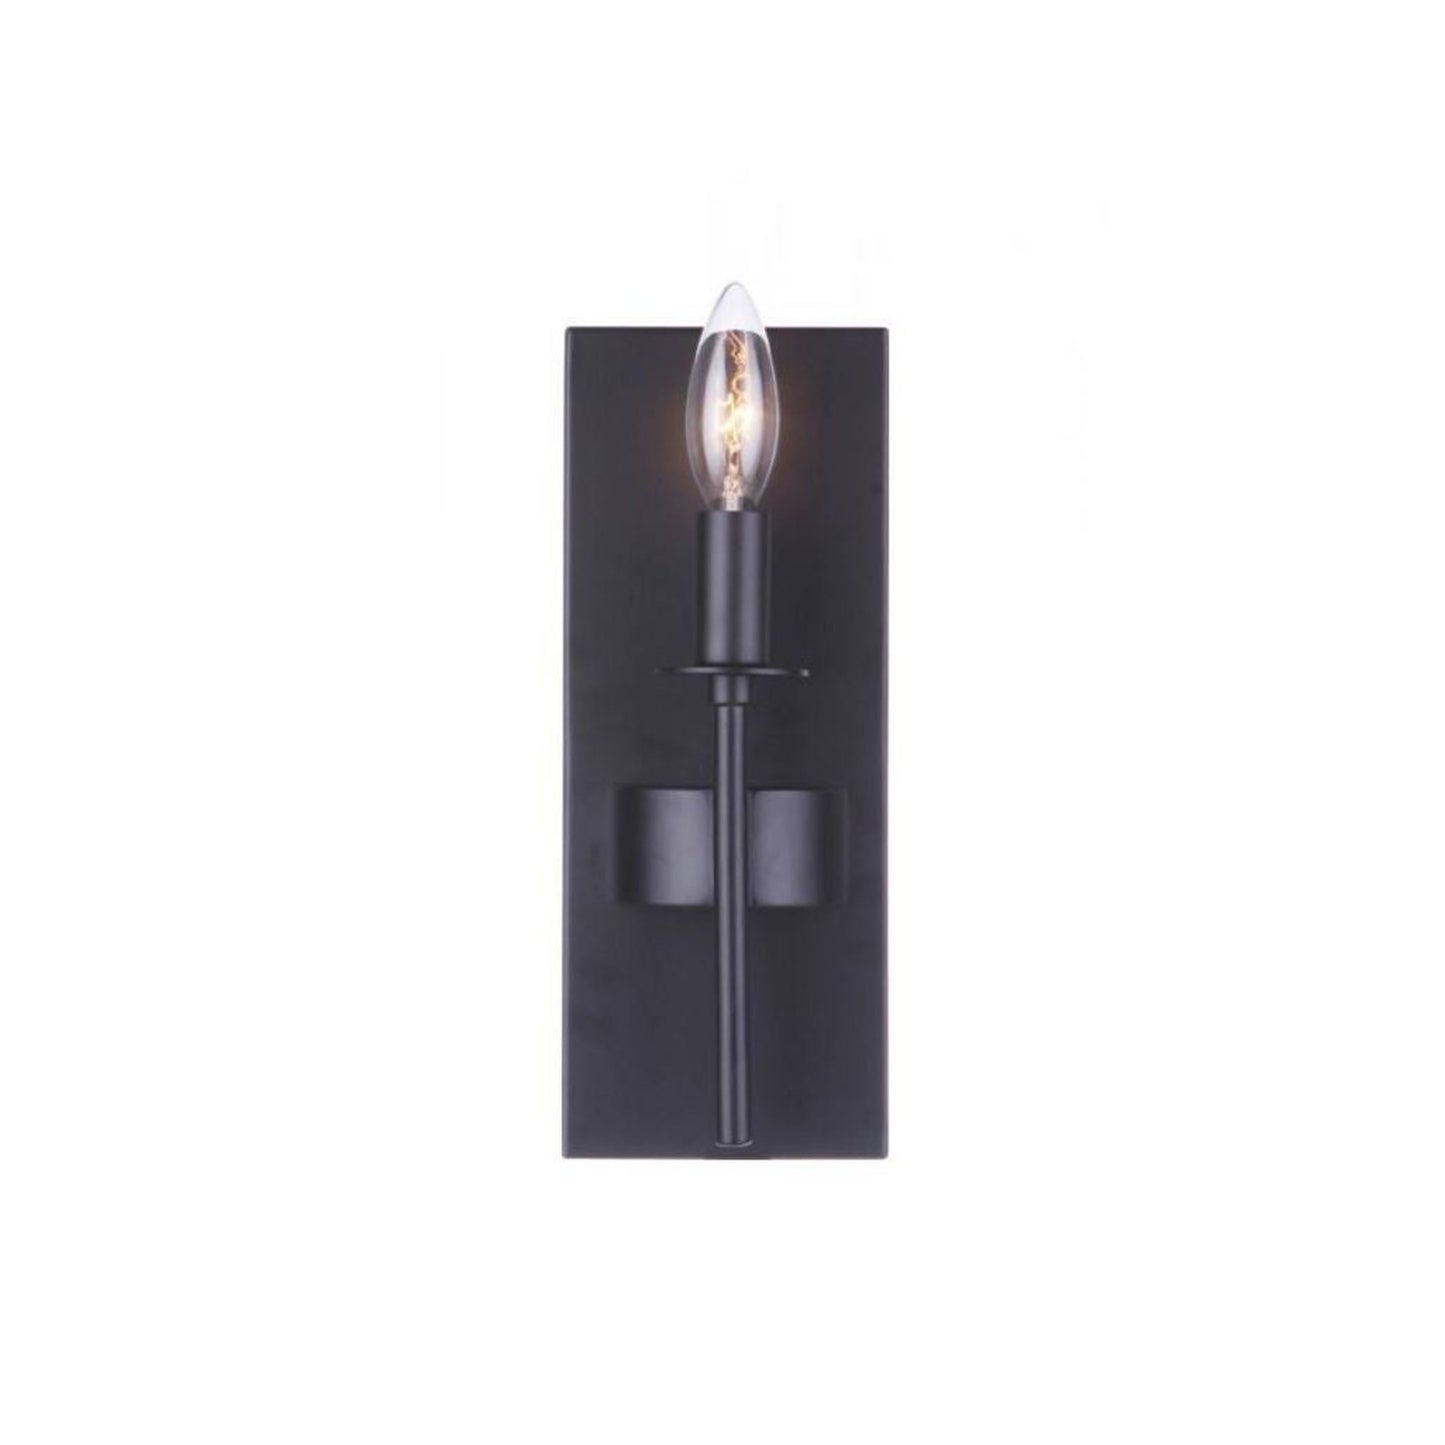 Craftmade Larrson 5" x 11" 1-Light Flat Black Candle-Style Wall Sconce